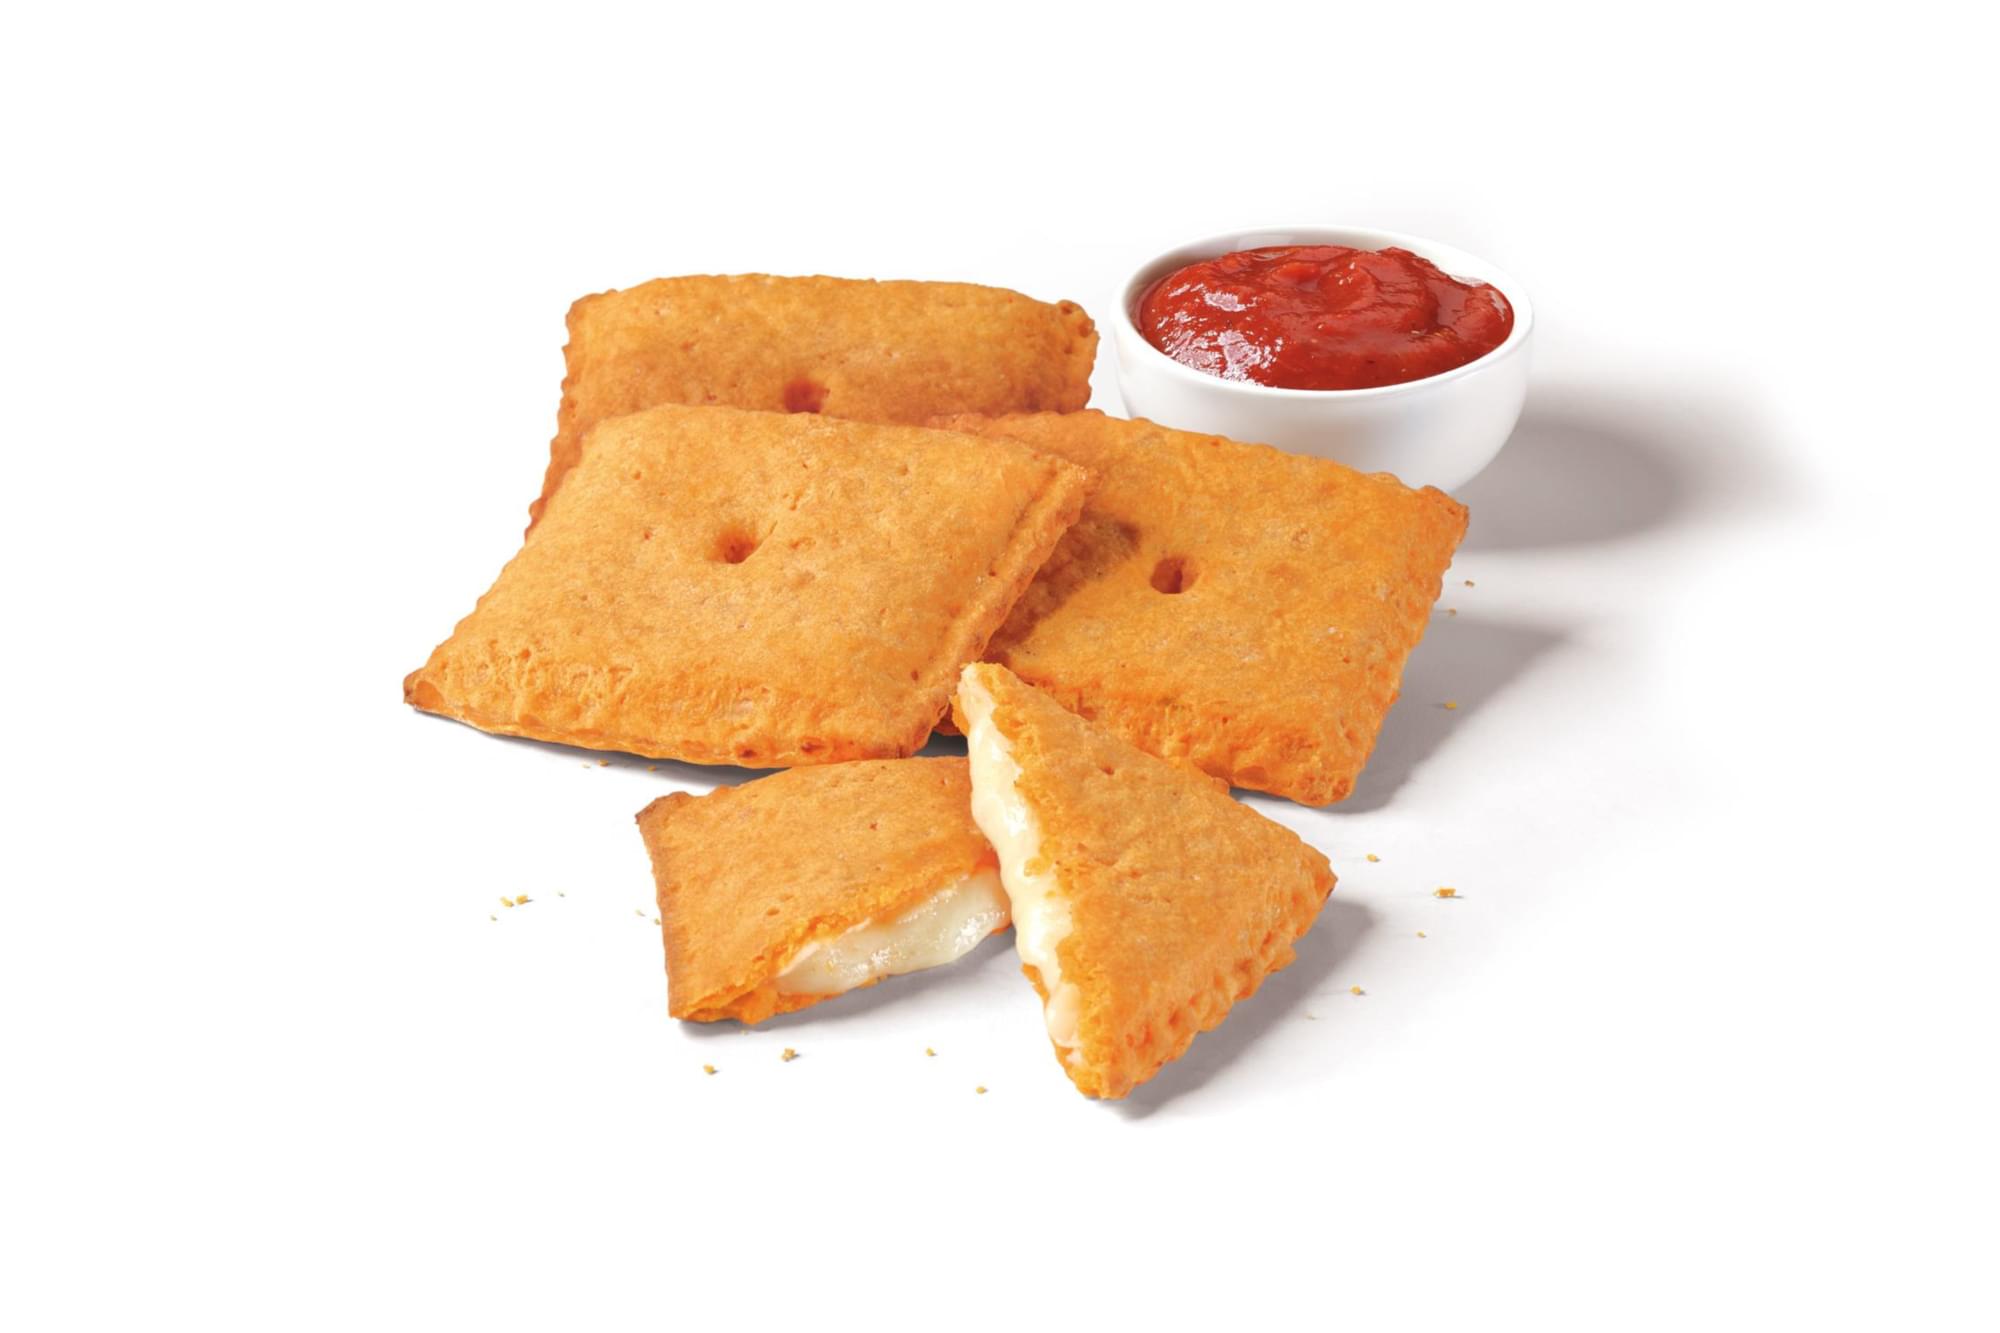 Pizza Hut Pepperoni & Cheese Stuffed Cheez-It Pizza Nutrition Facts